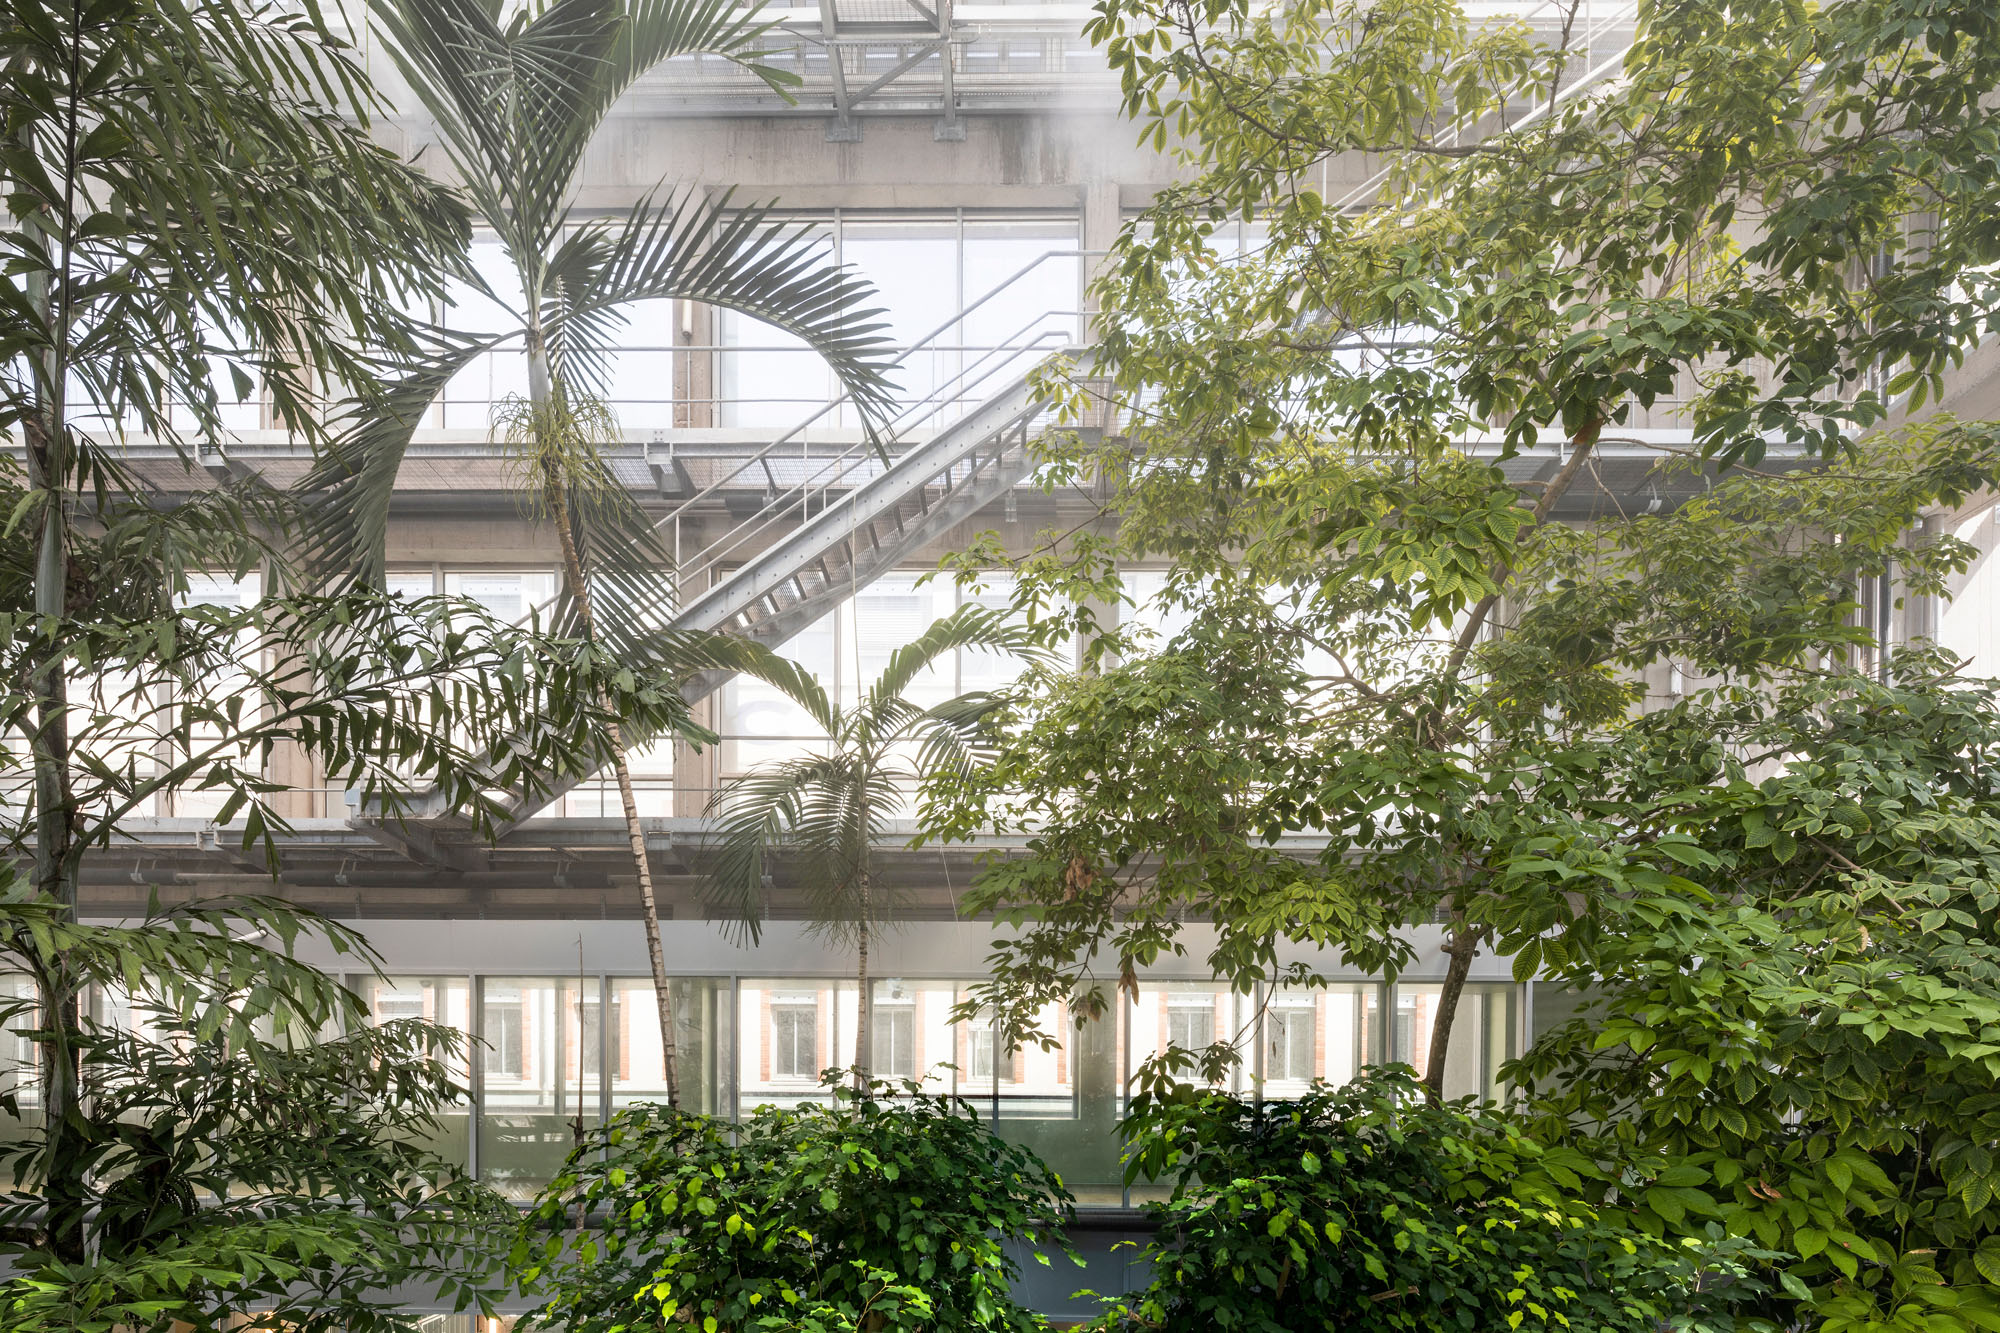 a photograph of a greenhouse that occupies the entrance to the michelin headquarters